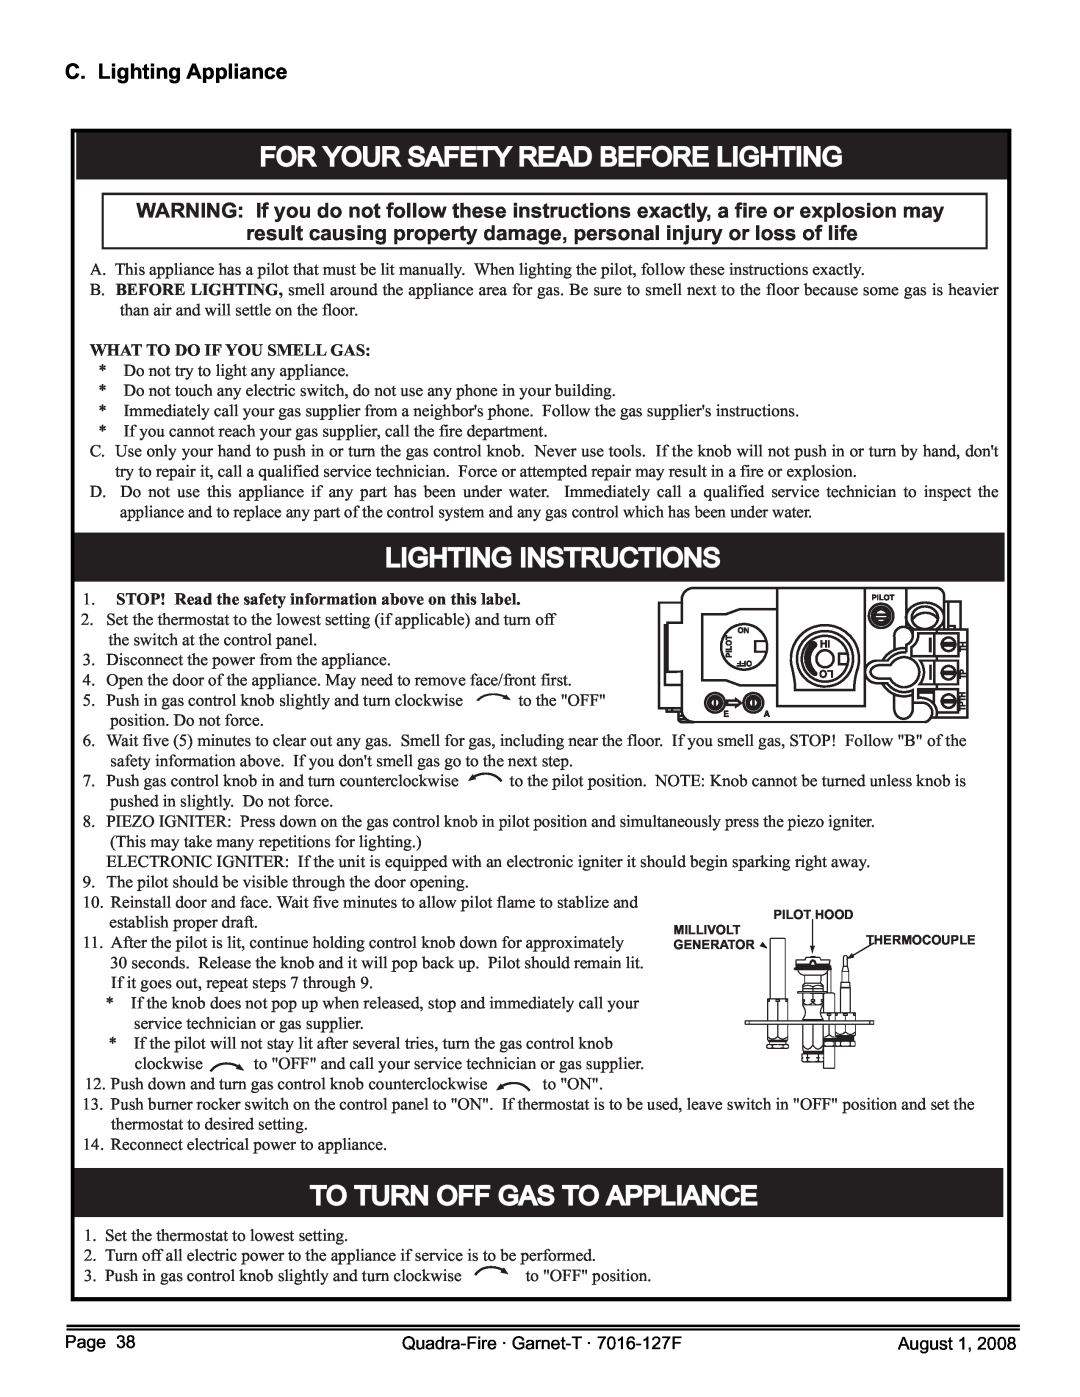 Quadra-Fire GARNET-D-CWL For Your Safety Read Before Lighting, Lighting Instructions, To Turn Off Gas To Appliance 